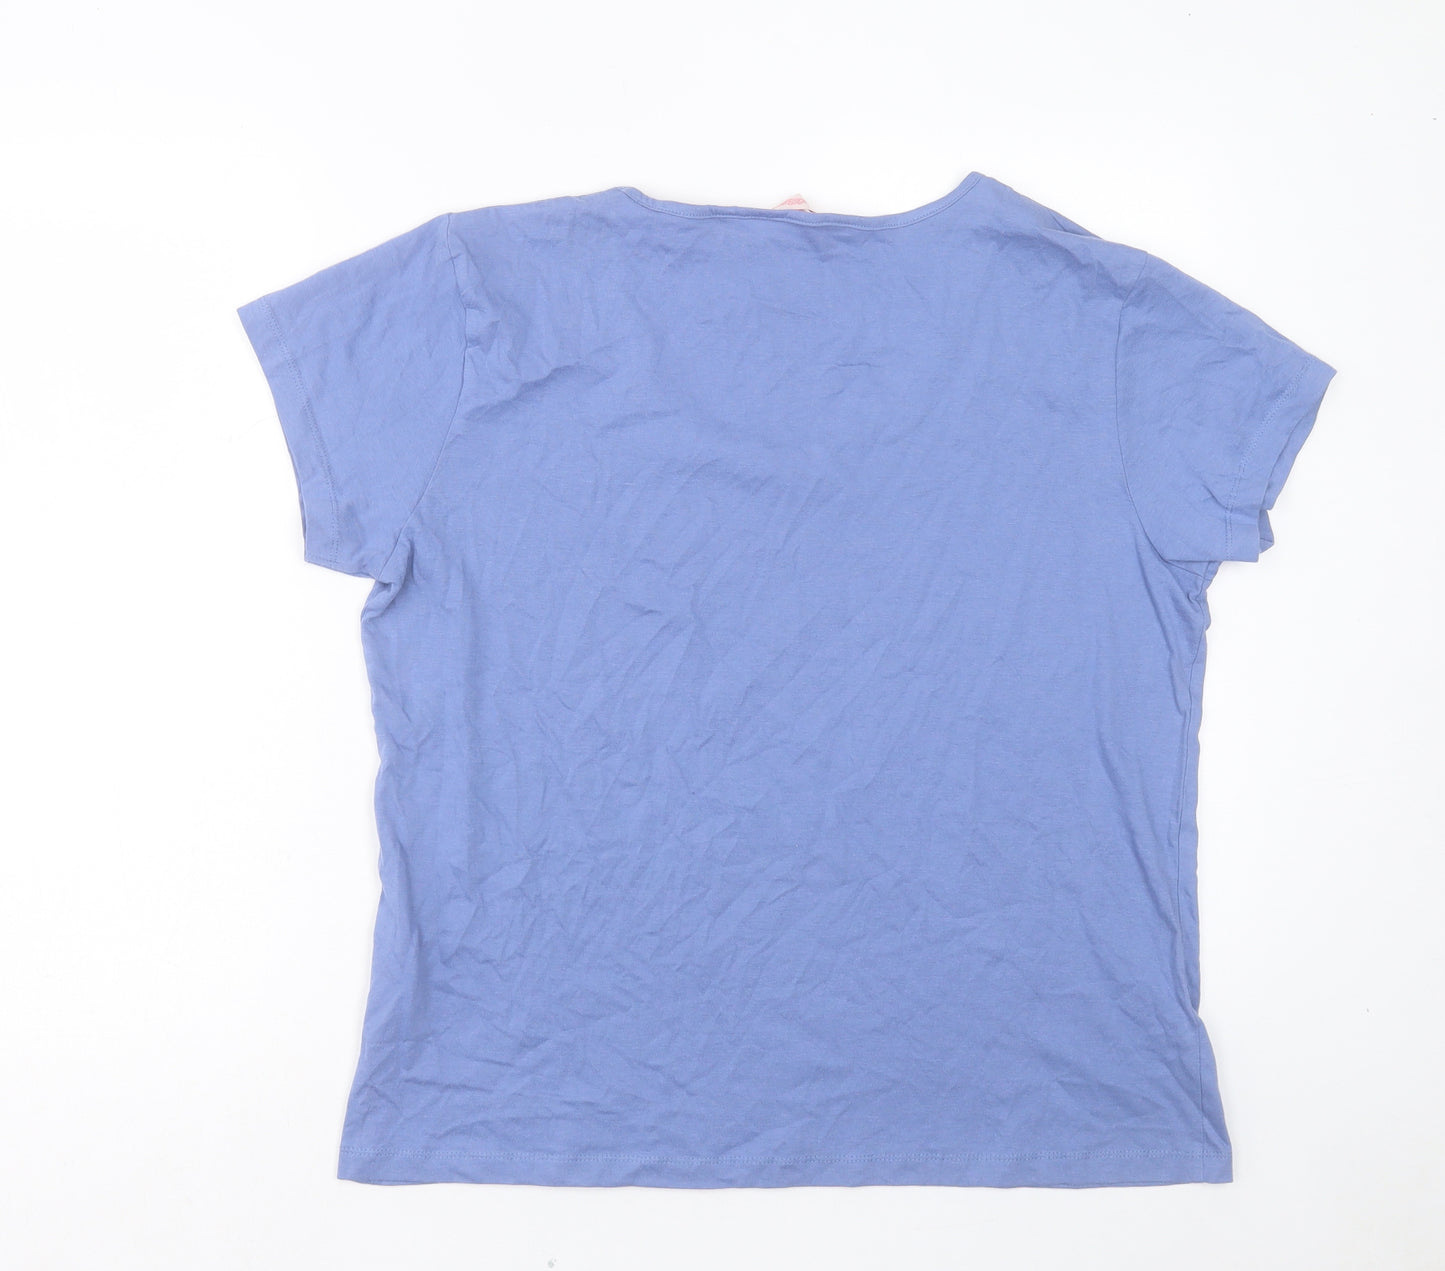 Board Angels Womens Blue Cotton Basic T-Shirt Size 18 Scoop Neck